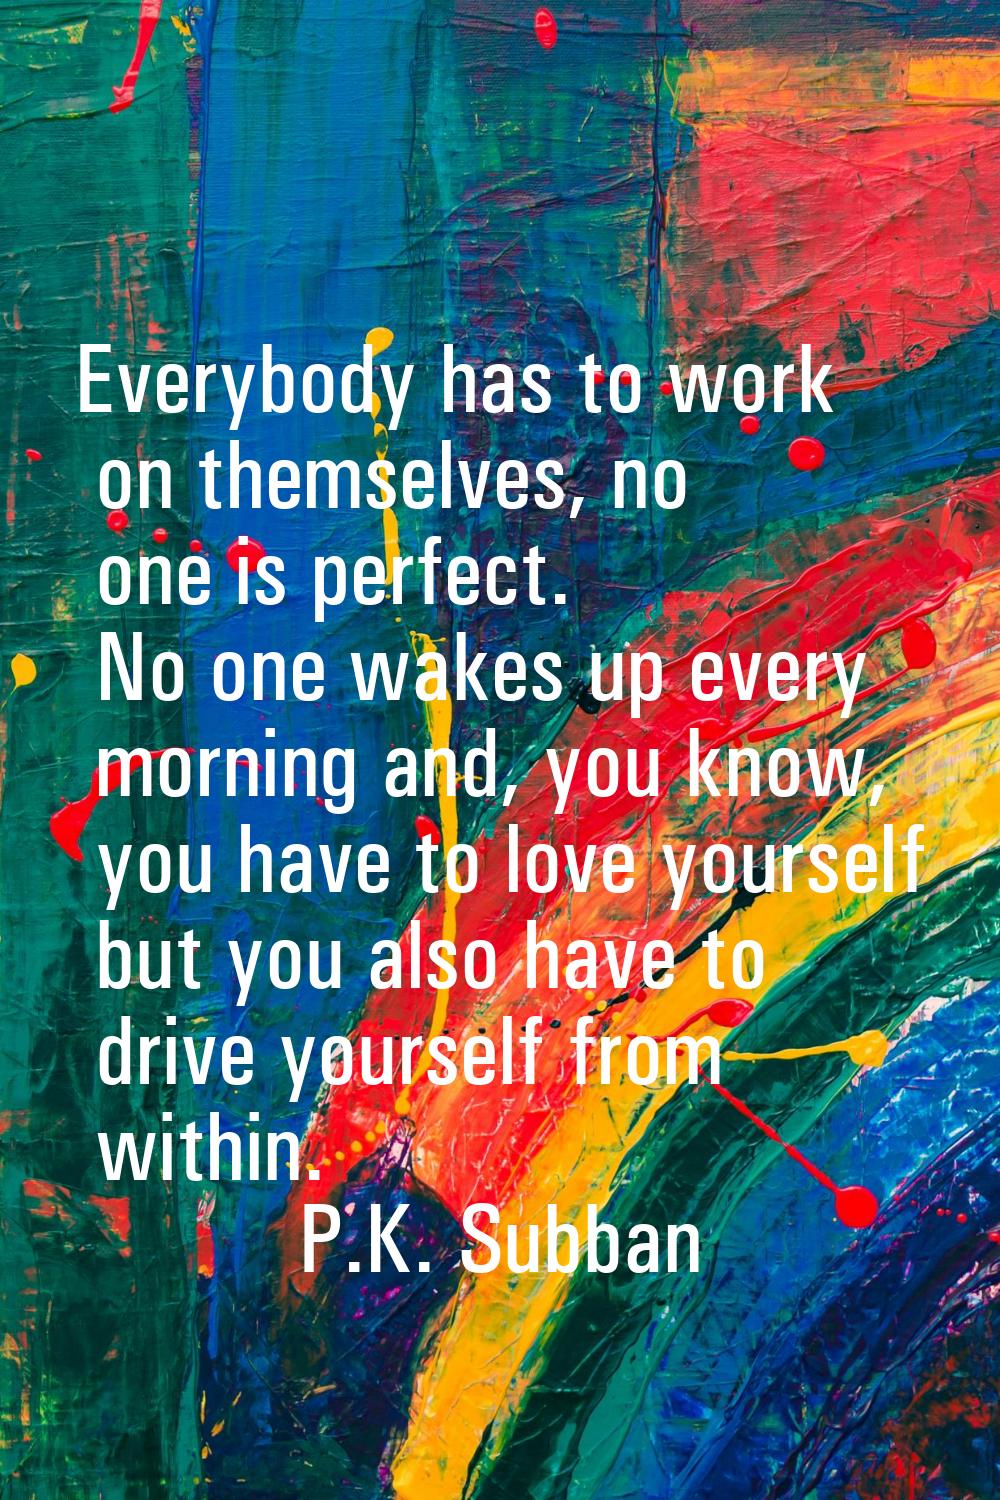 Everybody has to work on themselves, no one is perfect. No one wakes up every morning and, you know